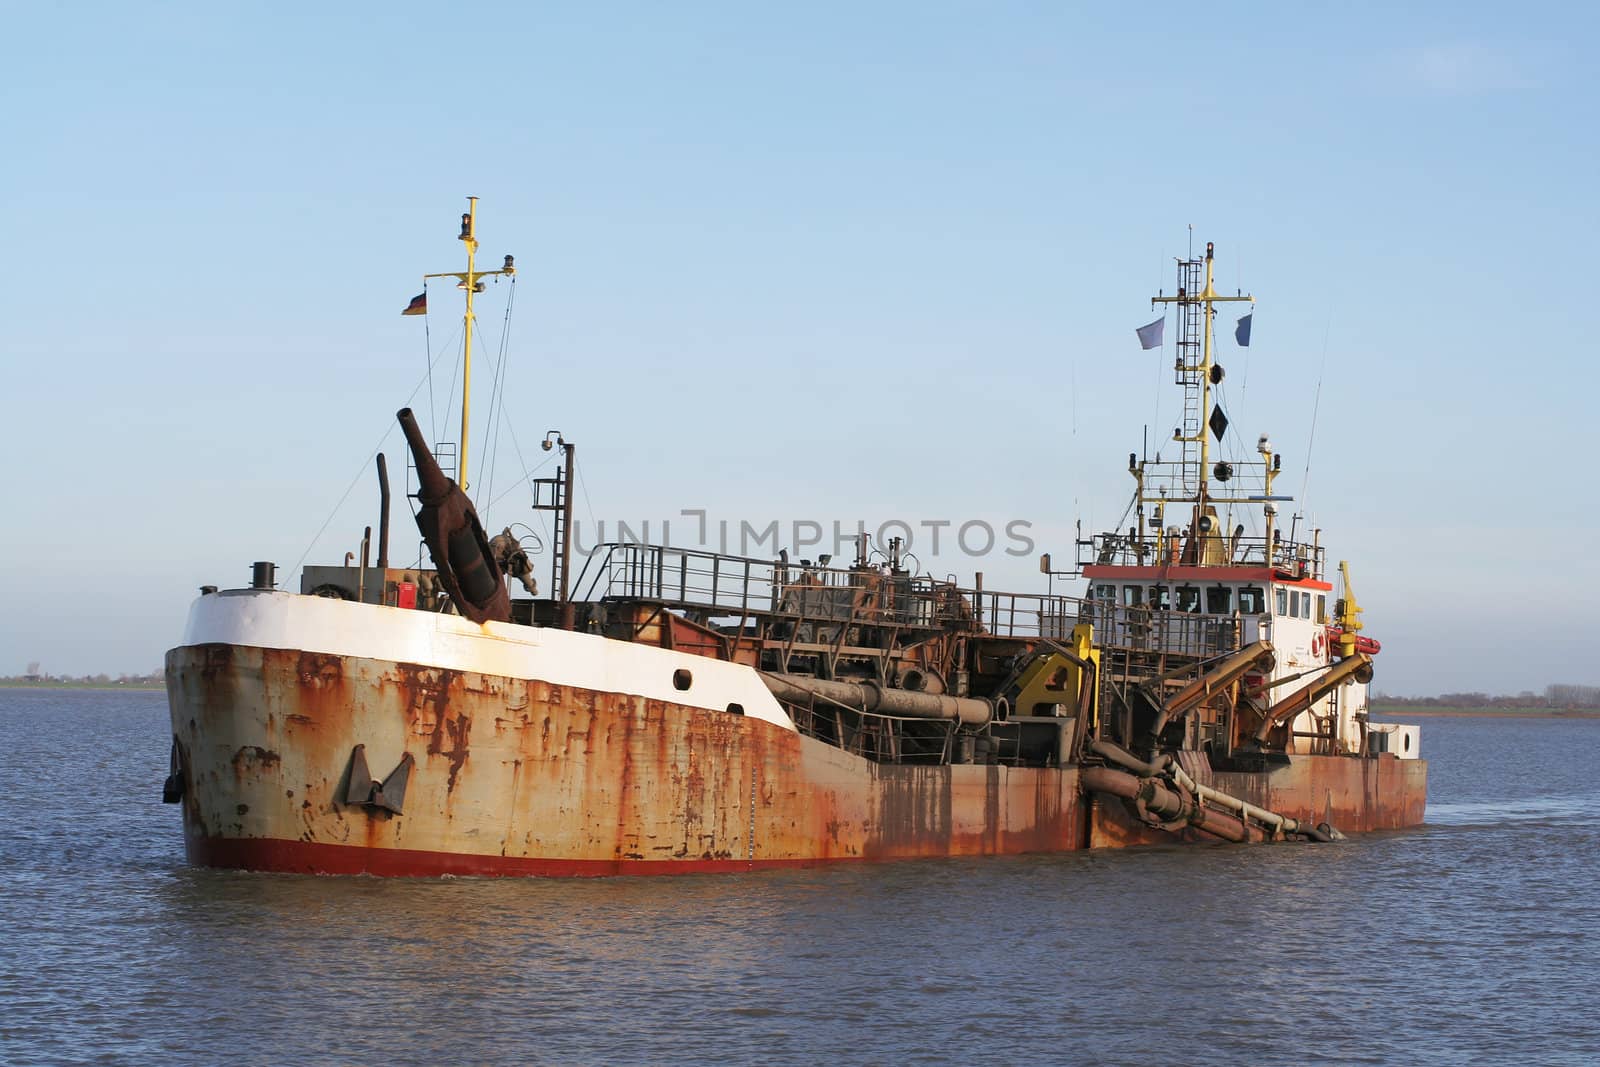 A rusty dredger ship (a trailing suction hopper dredger) on river Elbe near Wischhafen.